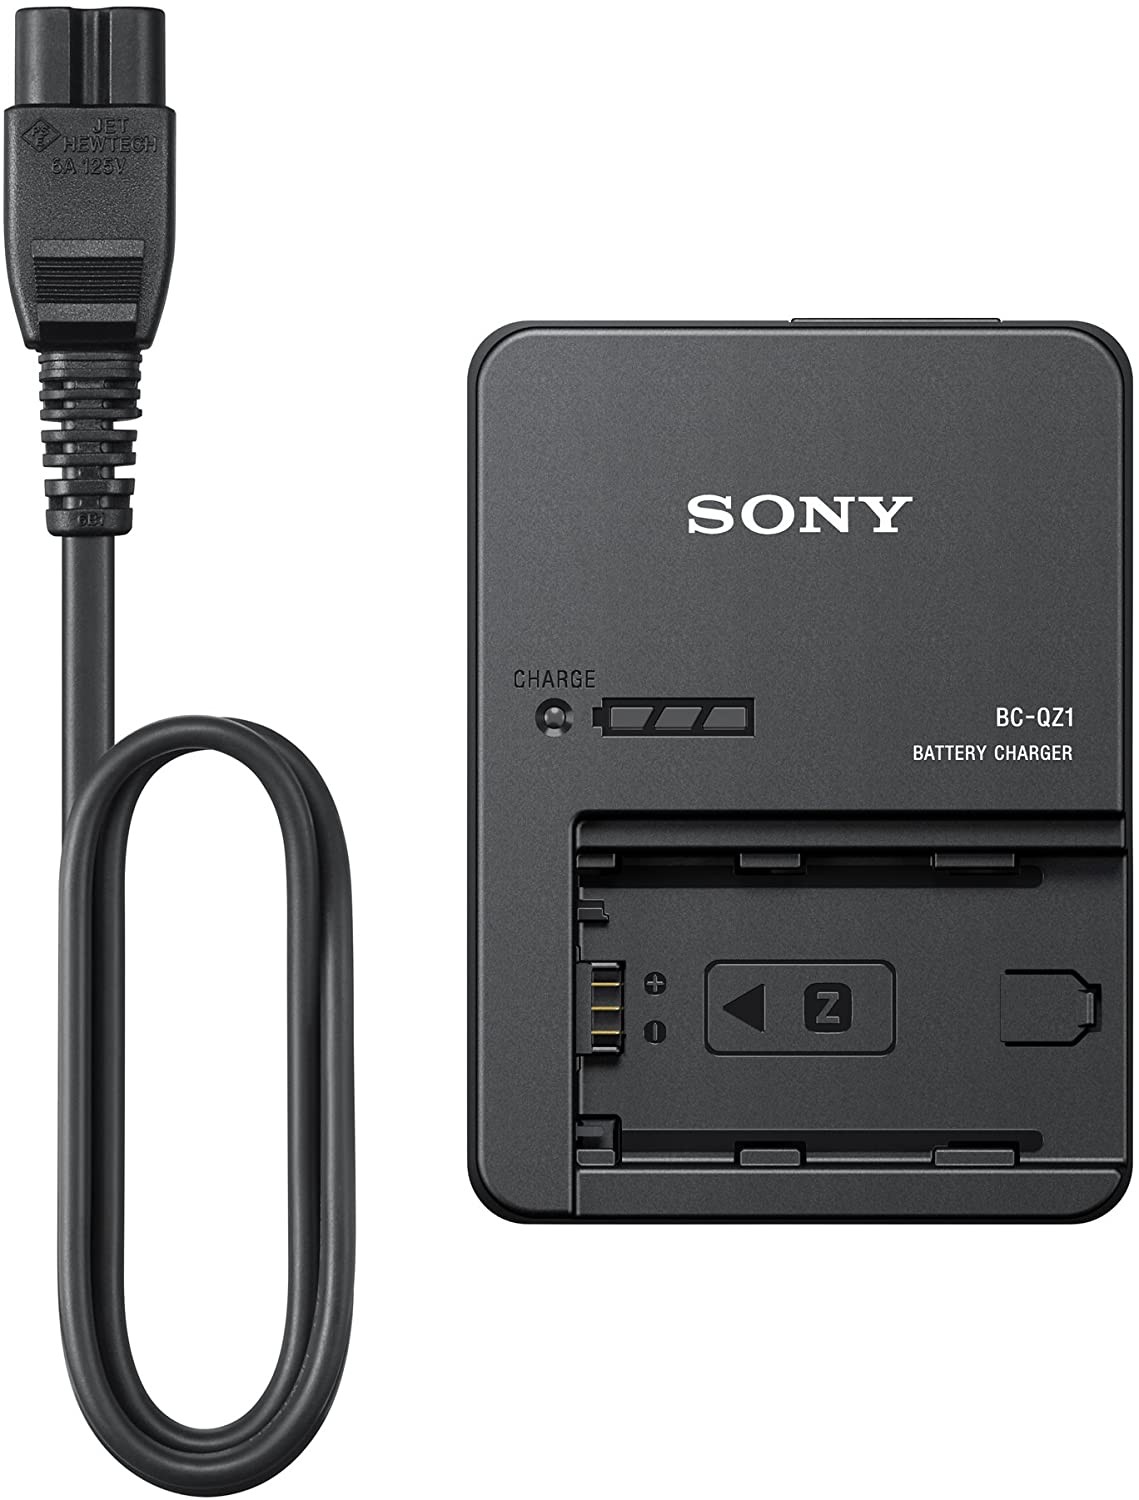 Sony BC-QZ1 Z-Series Battery Charger, Black